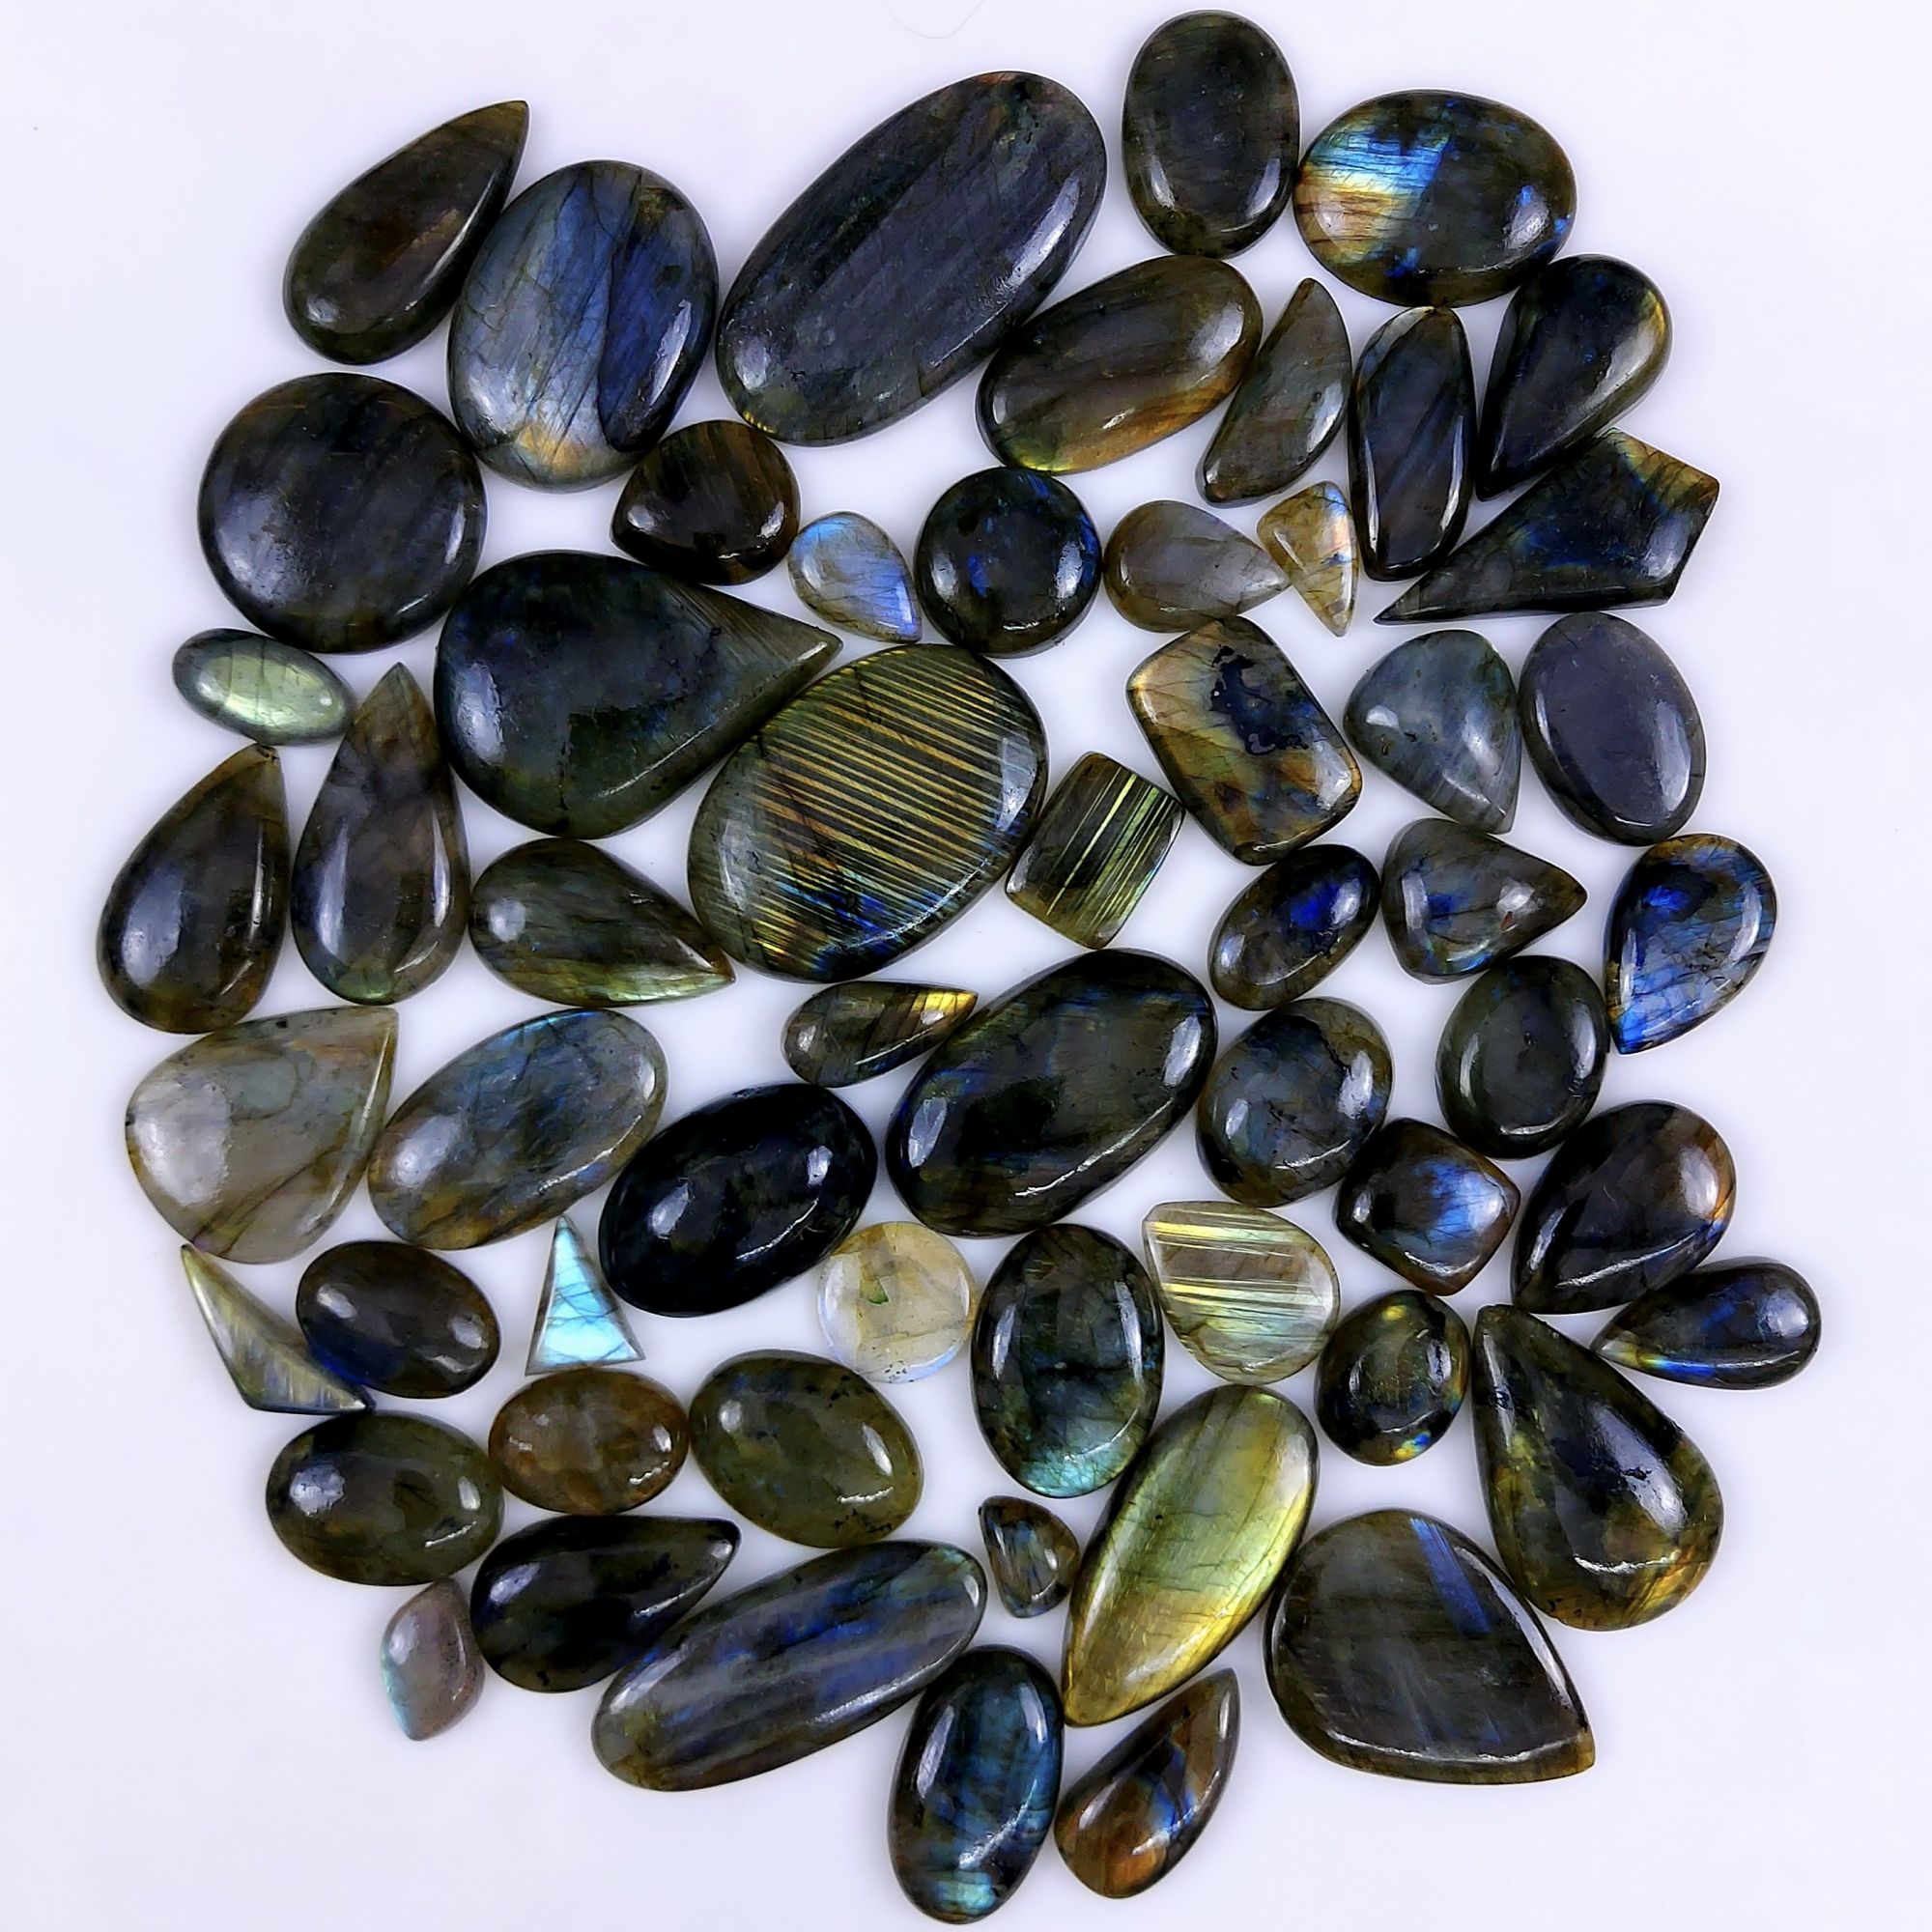 58pc 1753Cts Labradorite Cabochon Multifire Healing Crystal For Jewelry Supplies, Labradorite Necklace Handmade Wire Wrapped Gemstone Pendant 52x28 14x10mm#6272